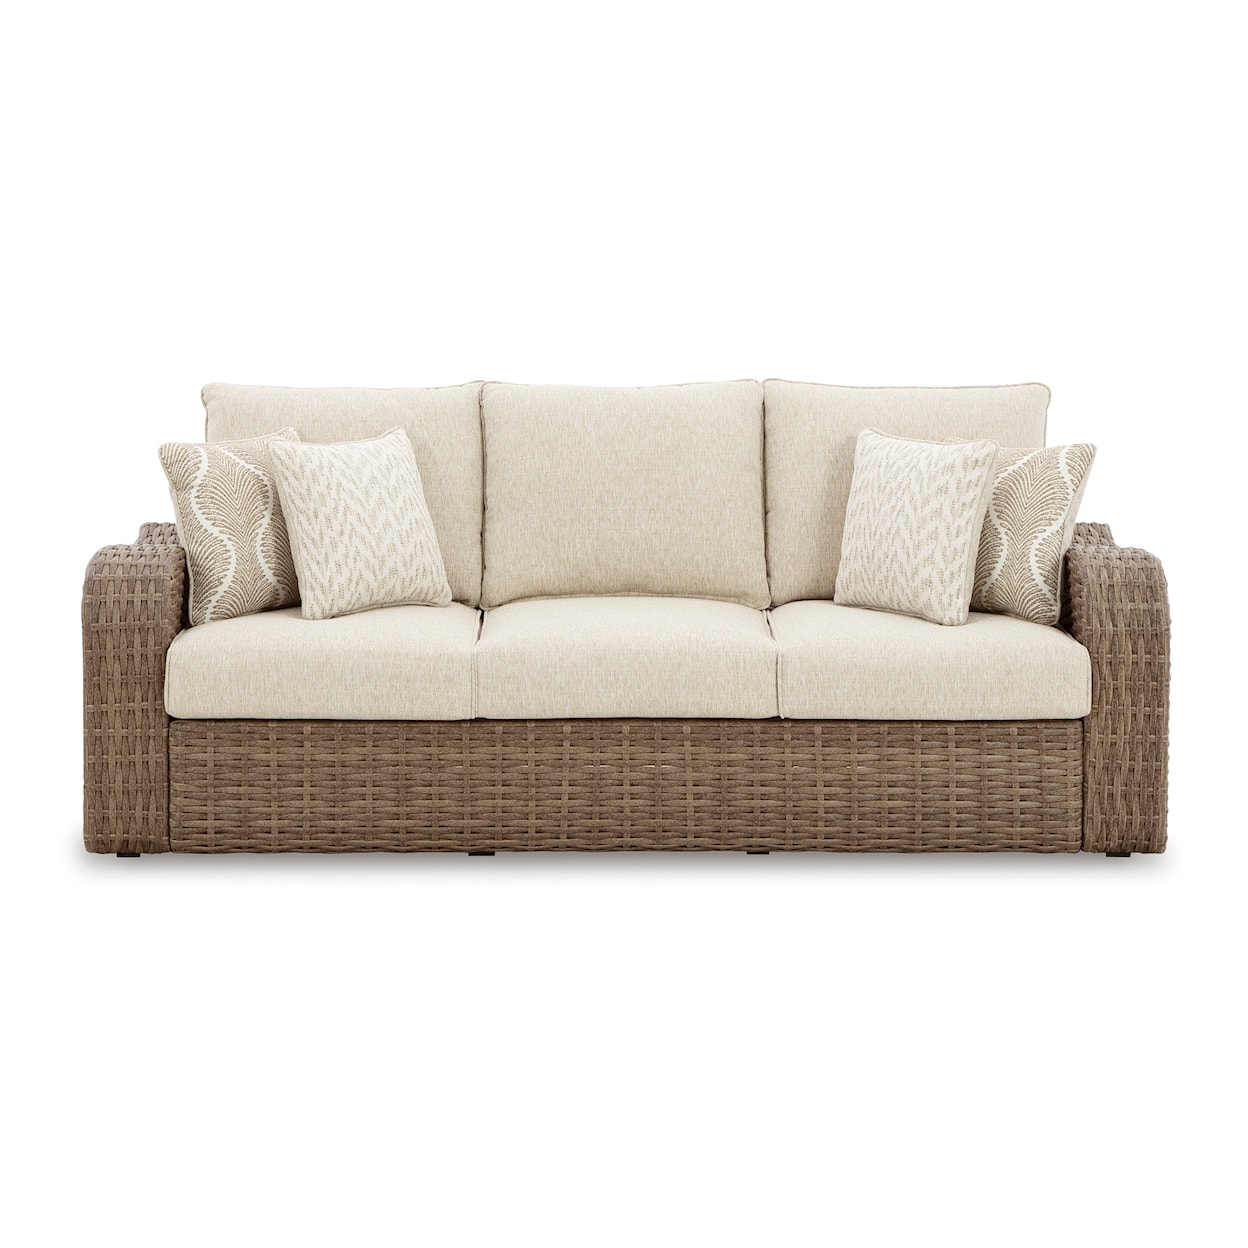 Michael Alan Select Sandy Bloom Outdoor Sofa with Cushion